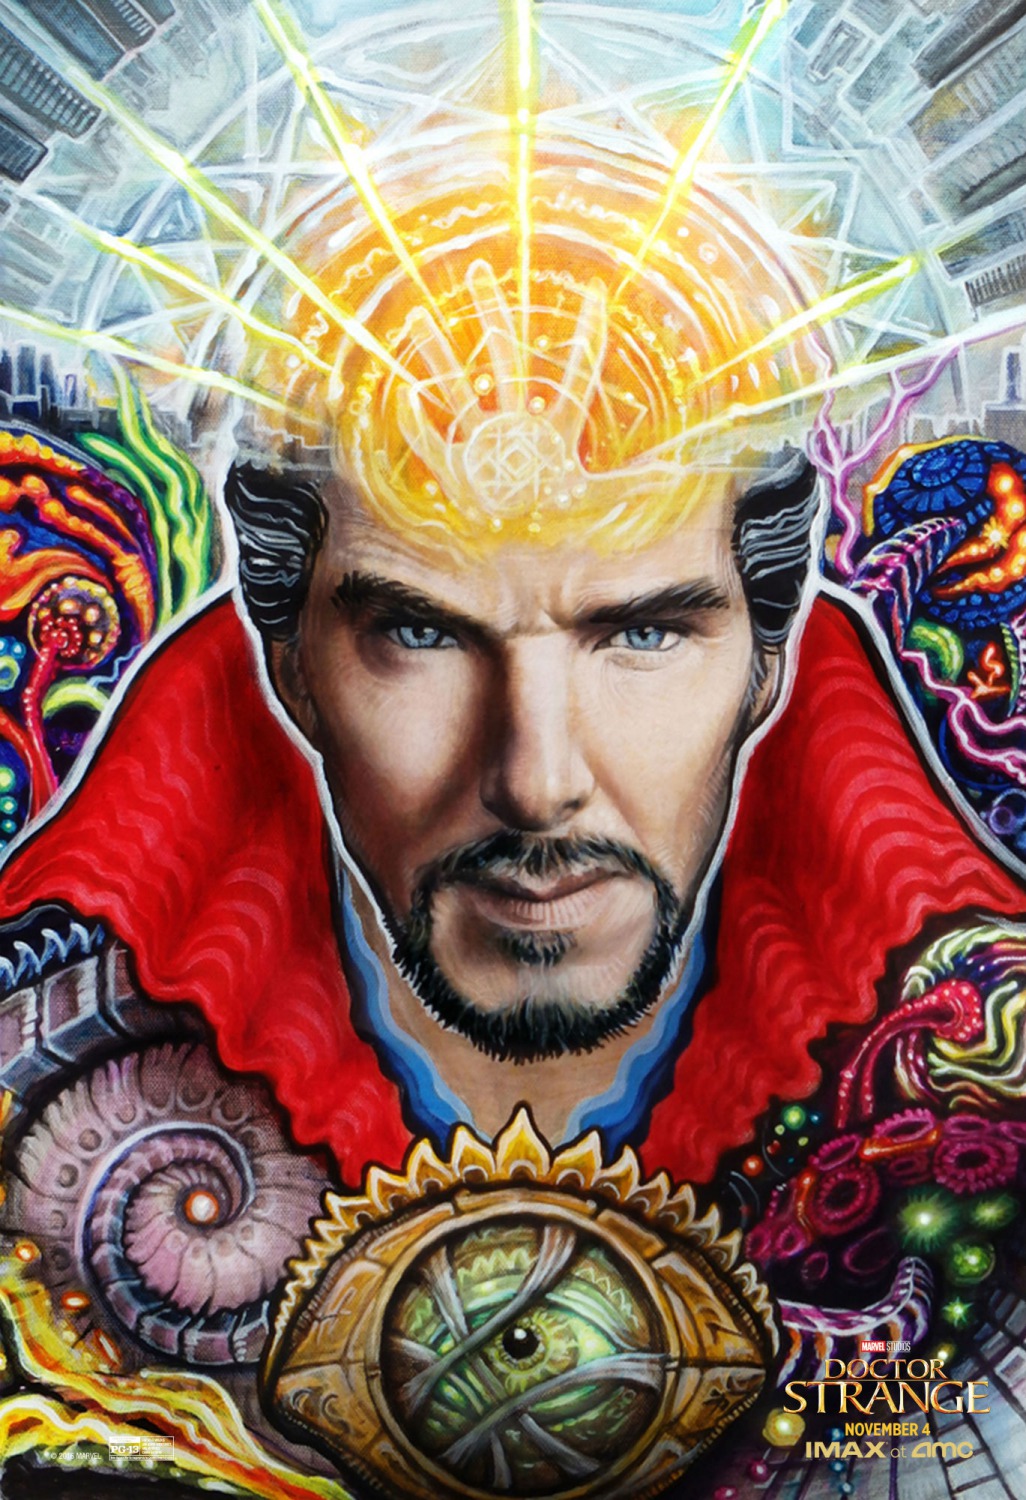 Extra Large Movie Poster Image for Doctor Strange (#18 of 29)